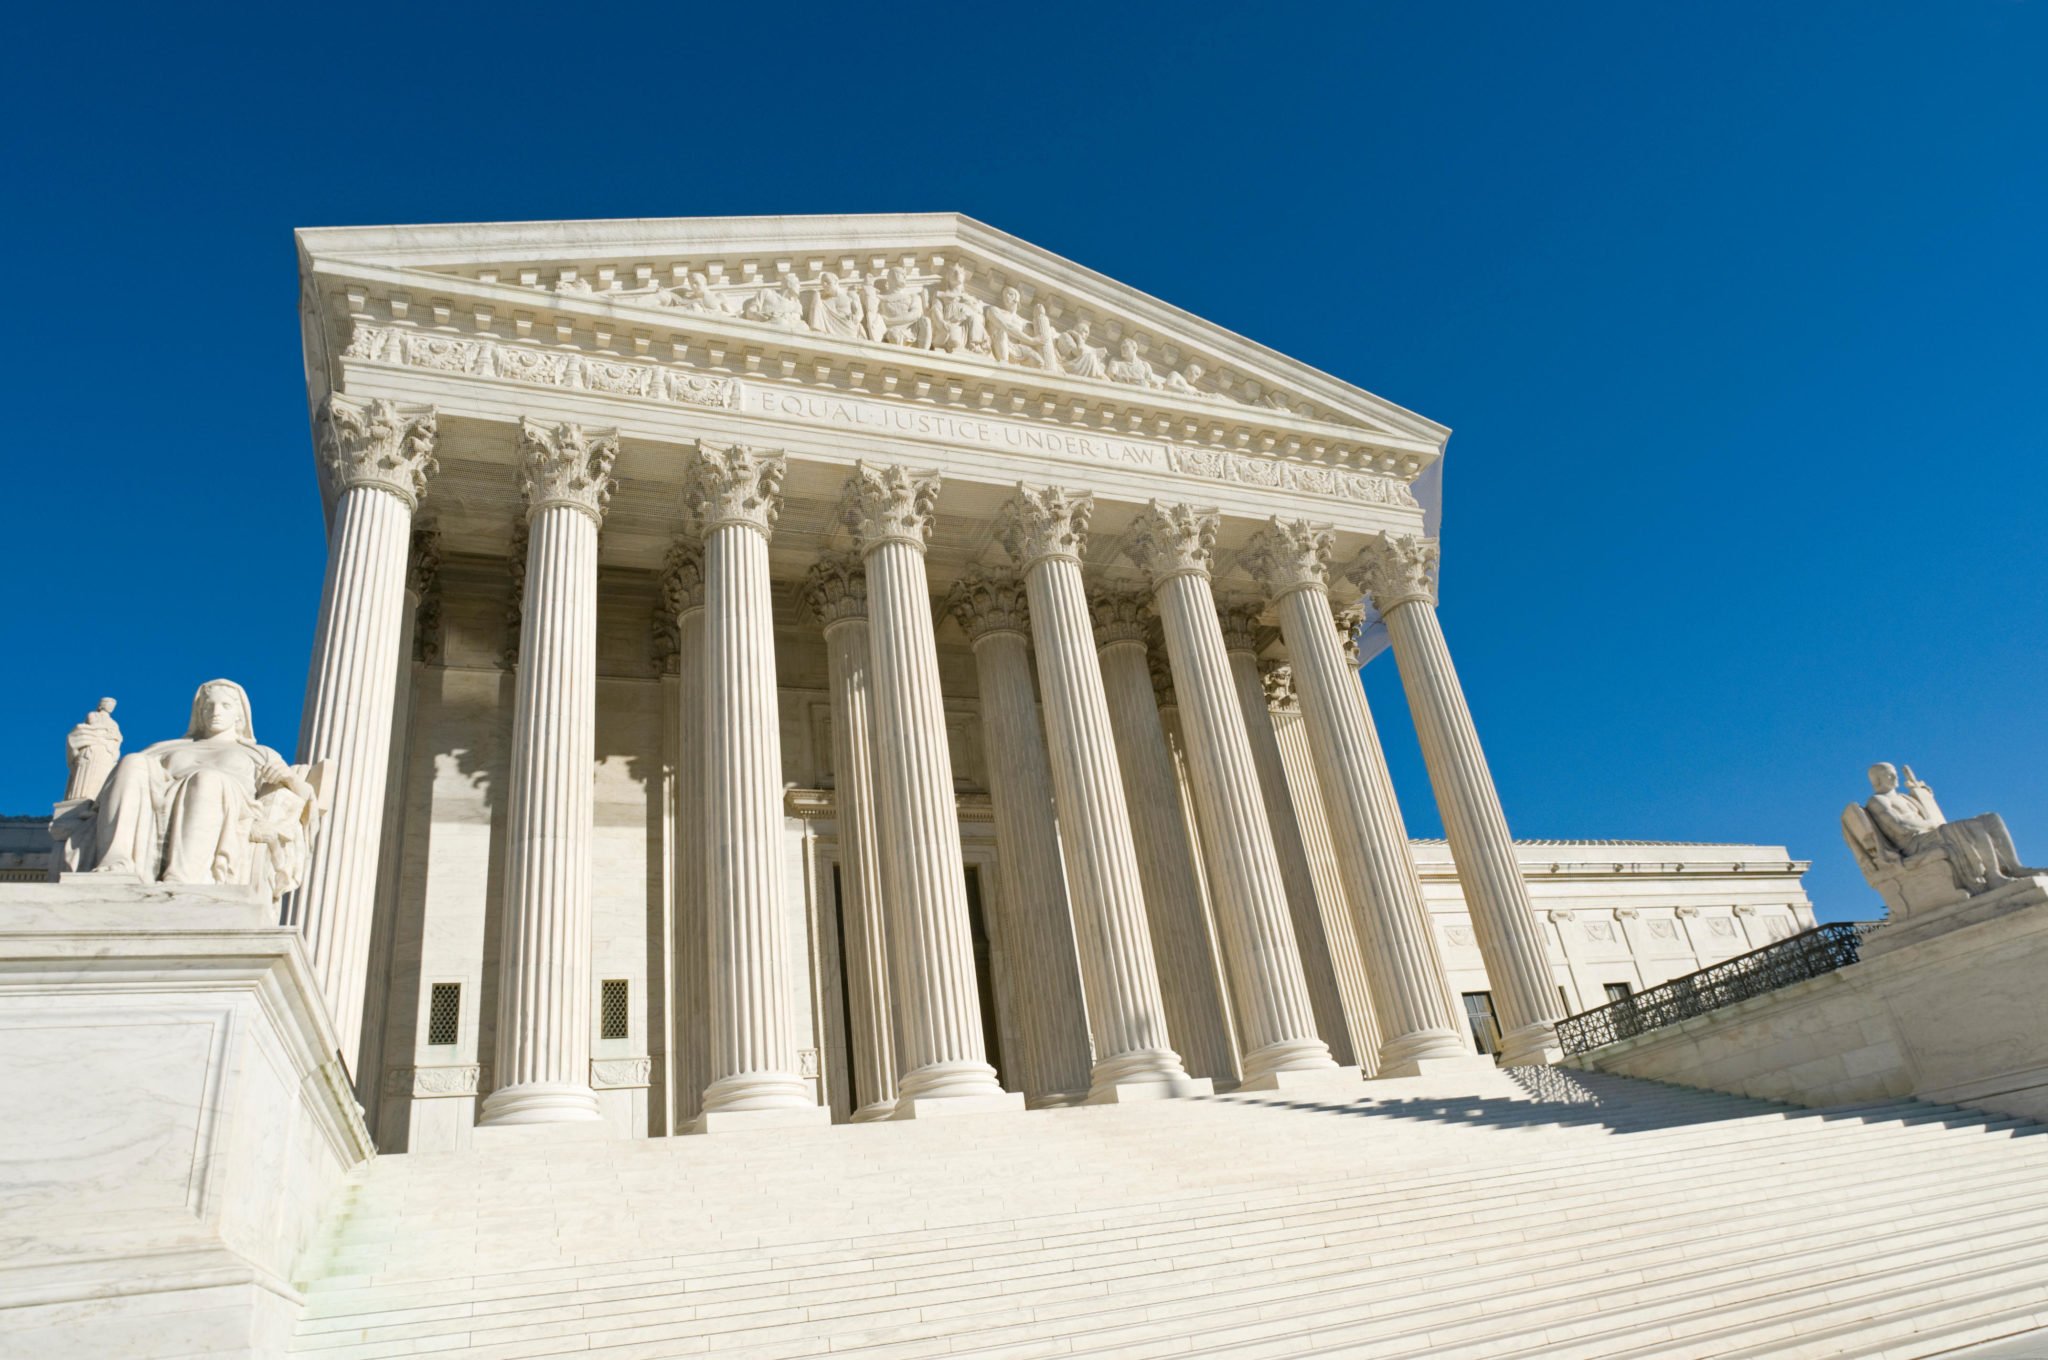 The US Supreme Court in Washington, DC is seen in January 2011. 